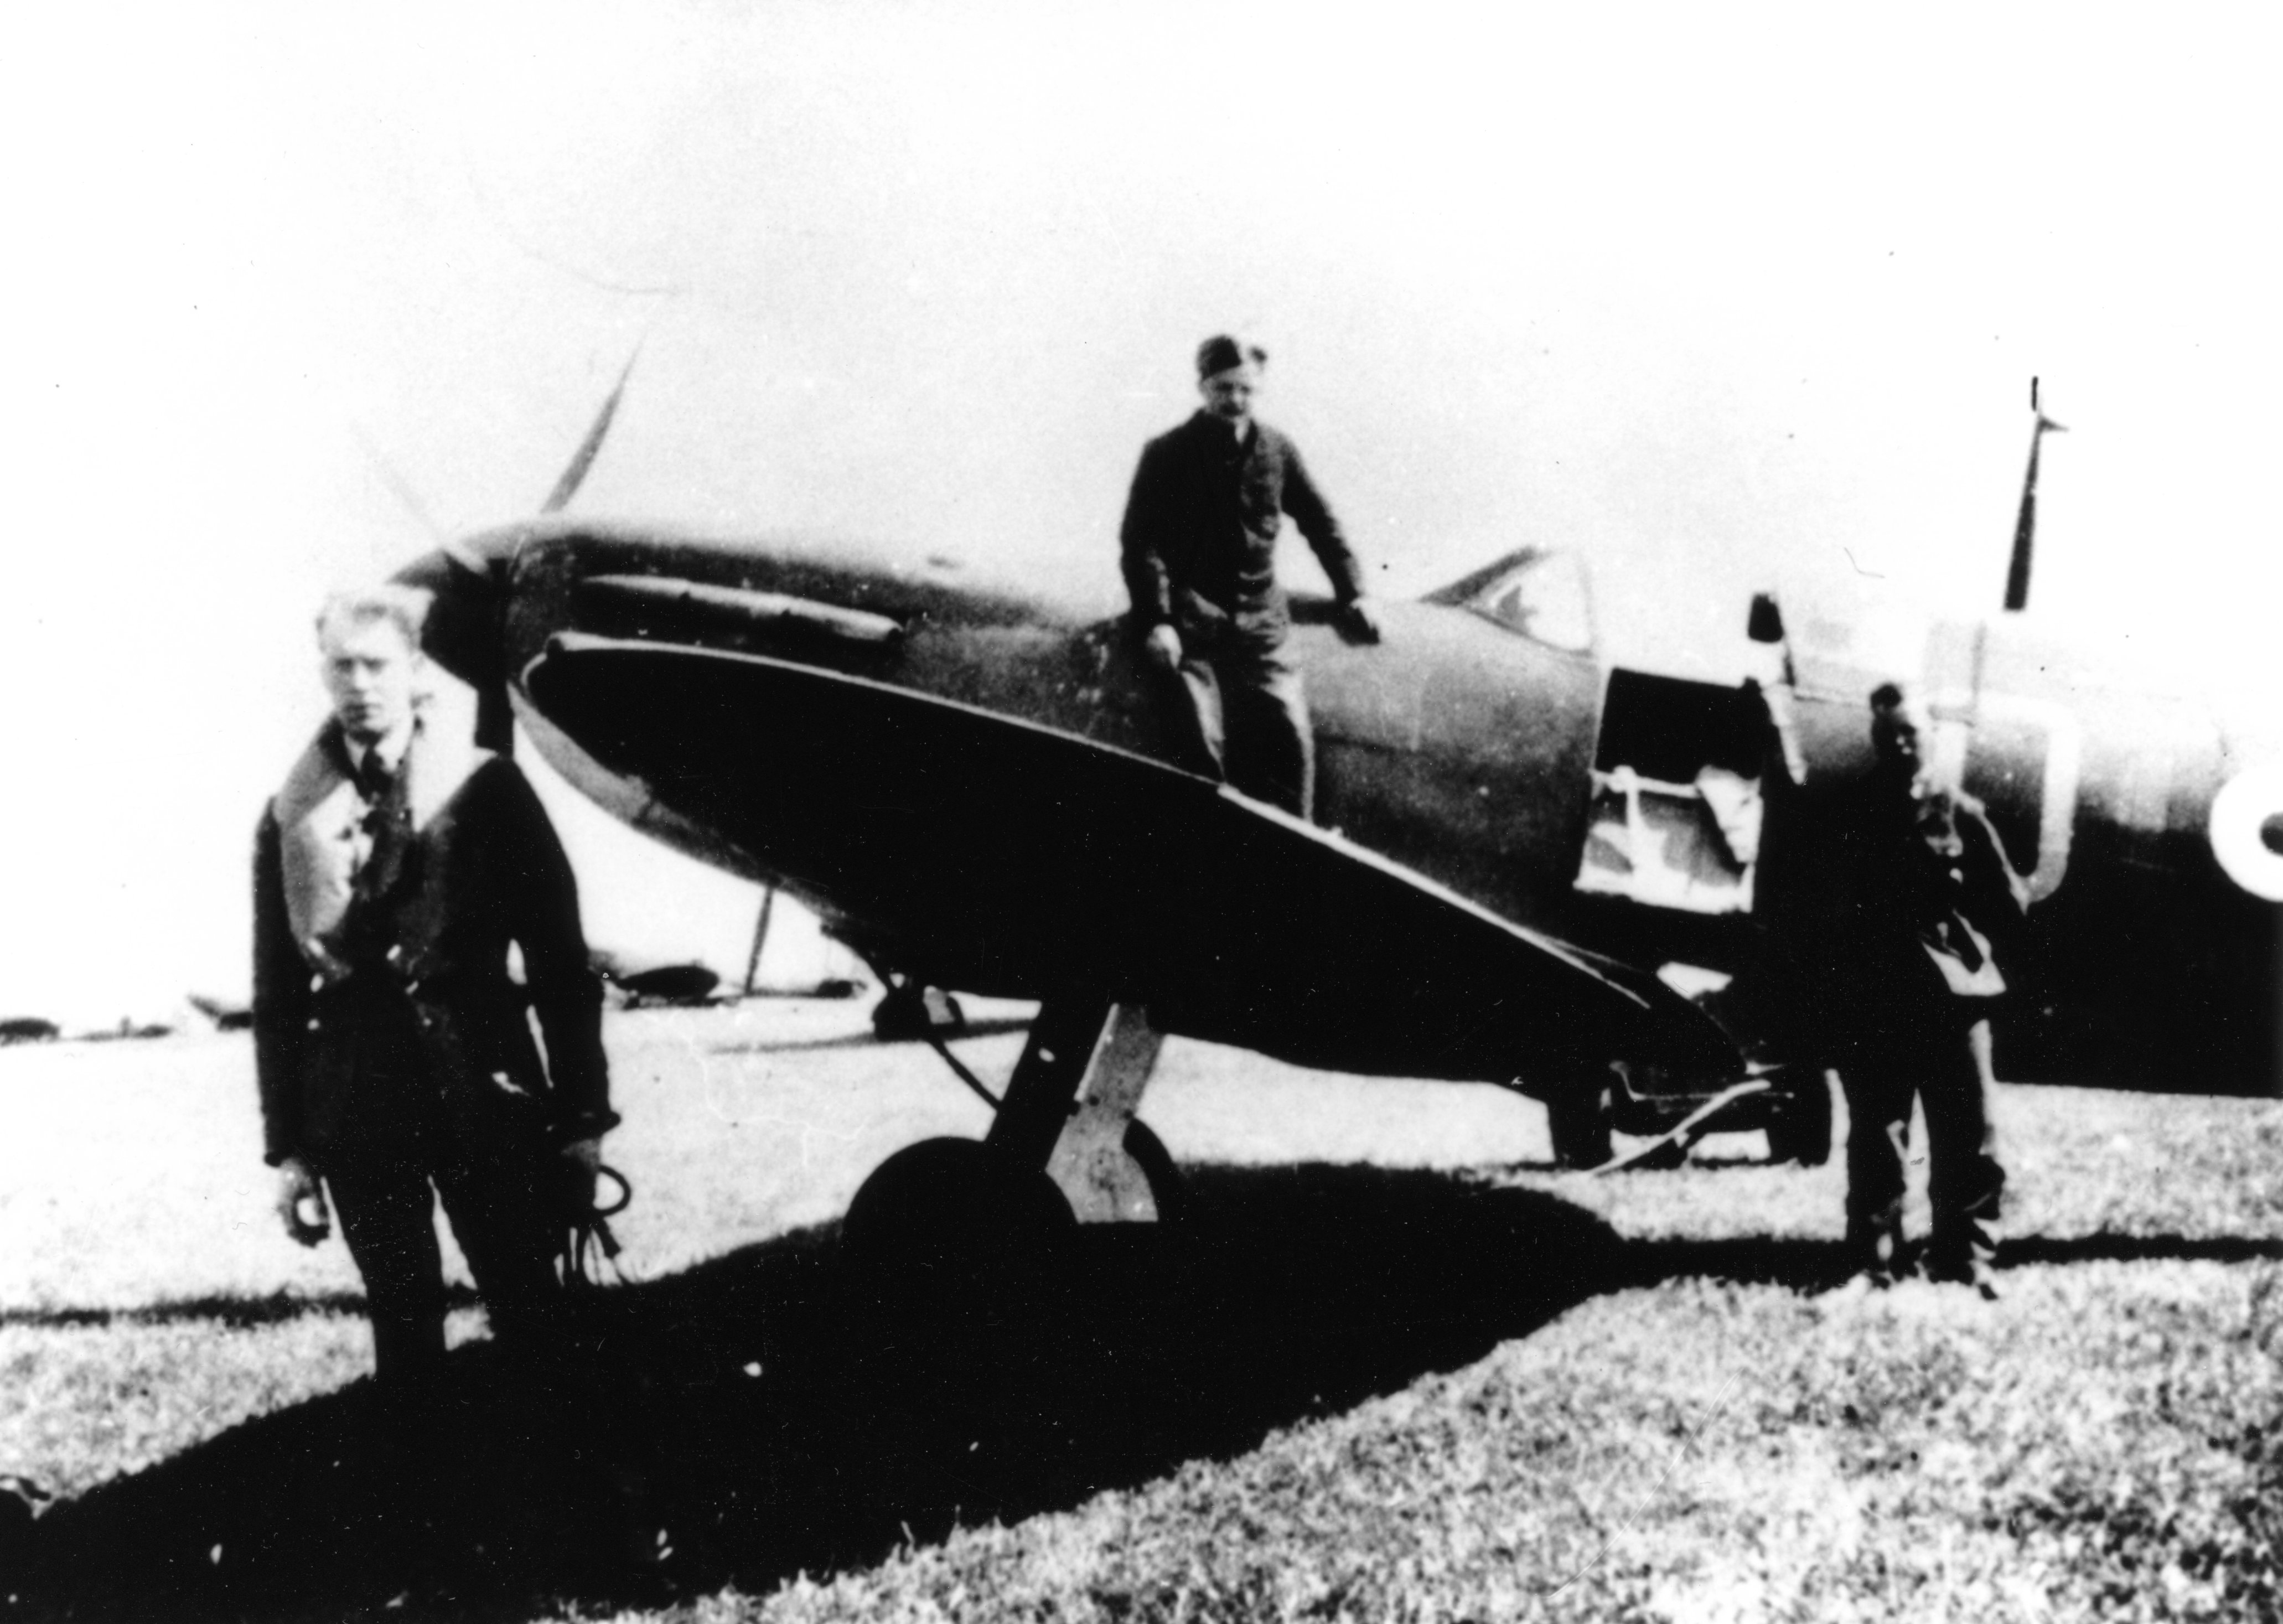 Bob and his first Spitfire